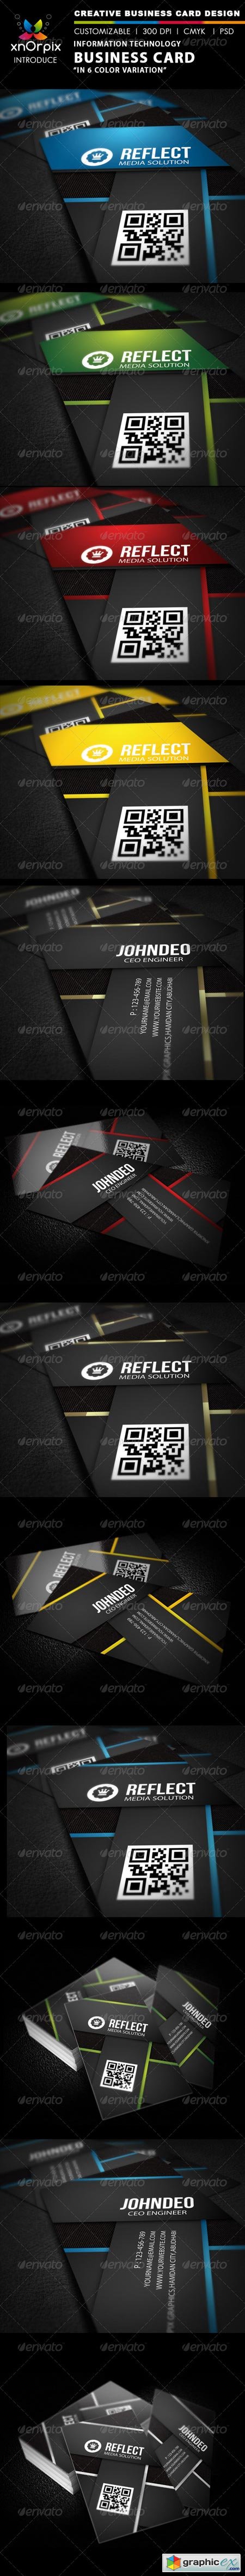 GraphicRiver Information Technology Business Card 2090280